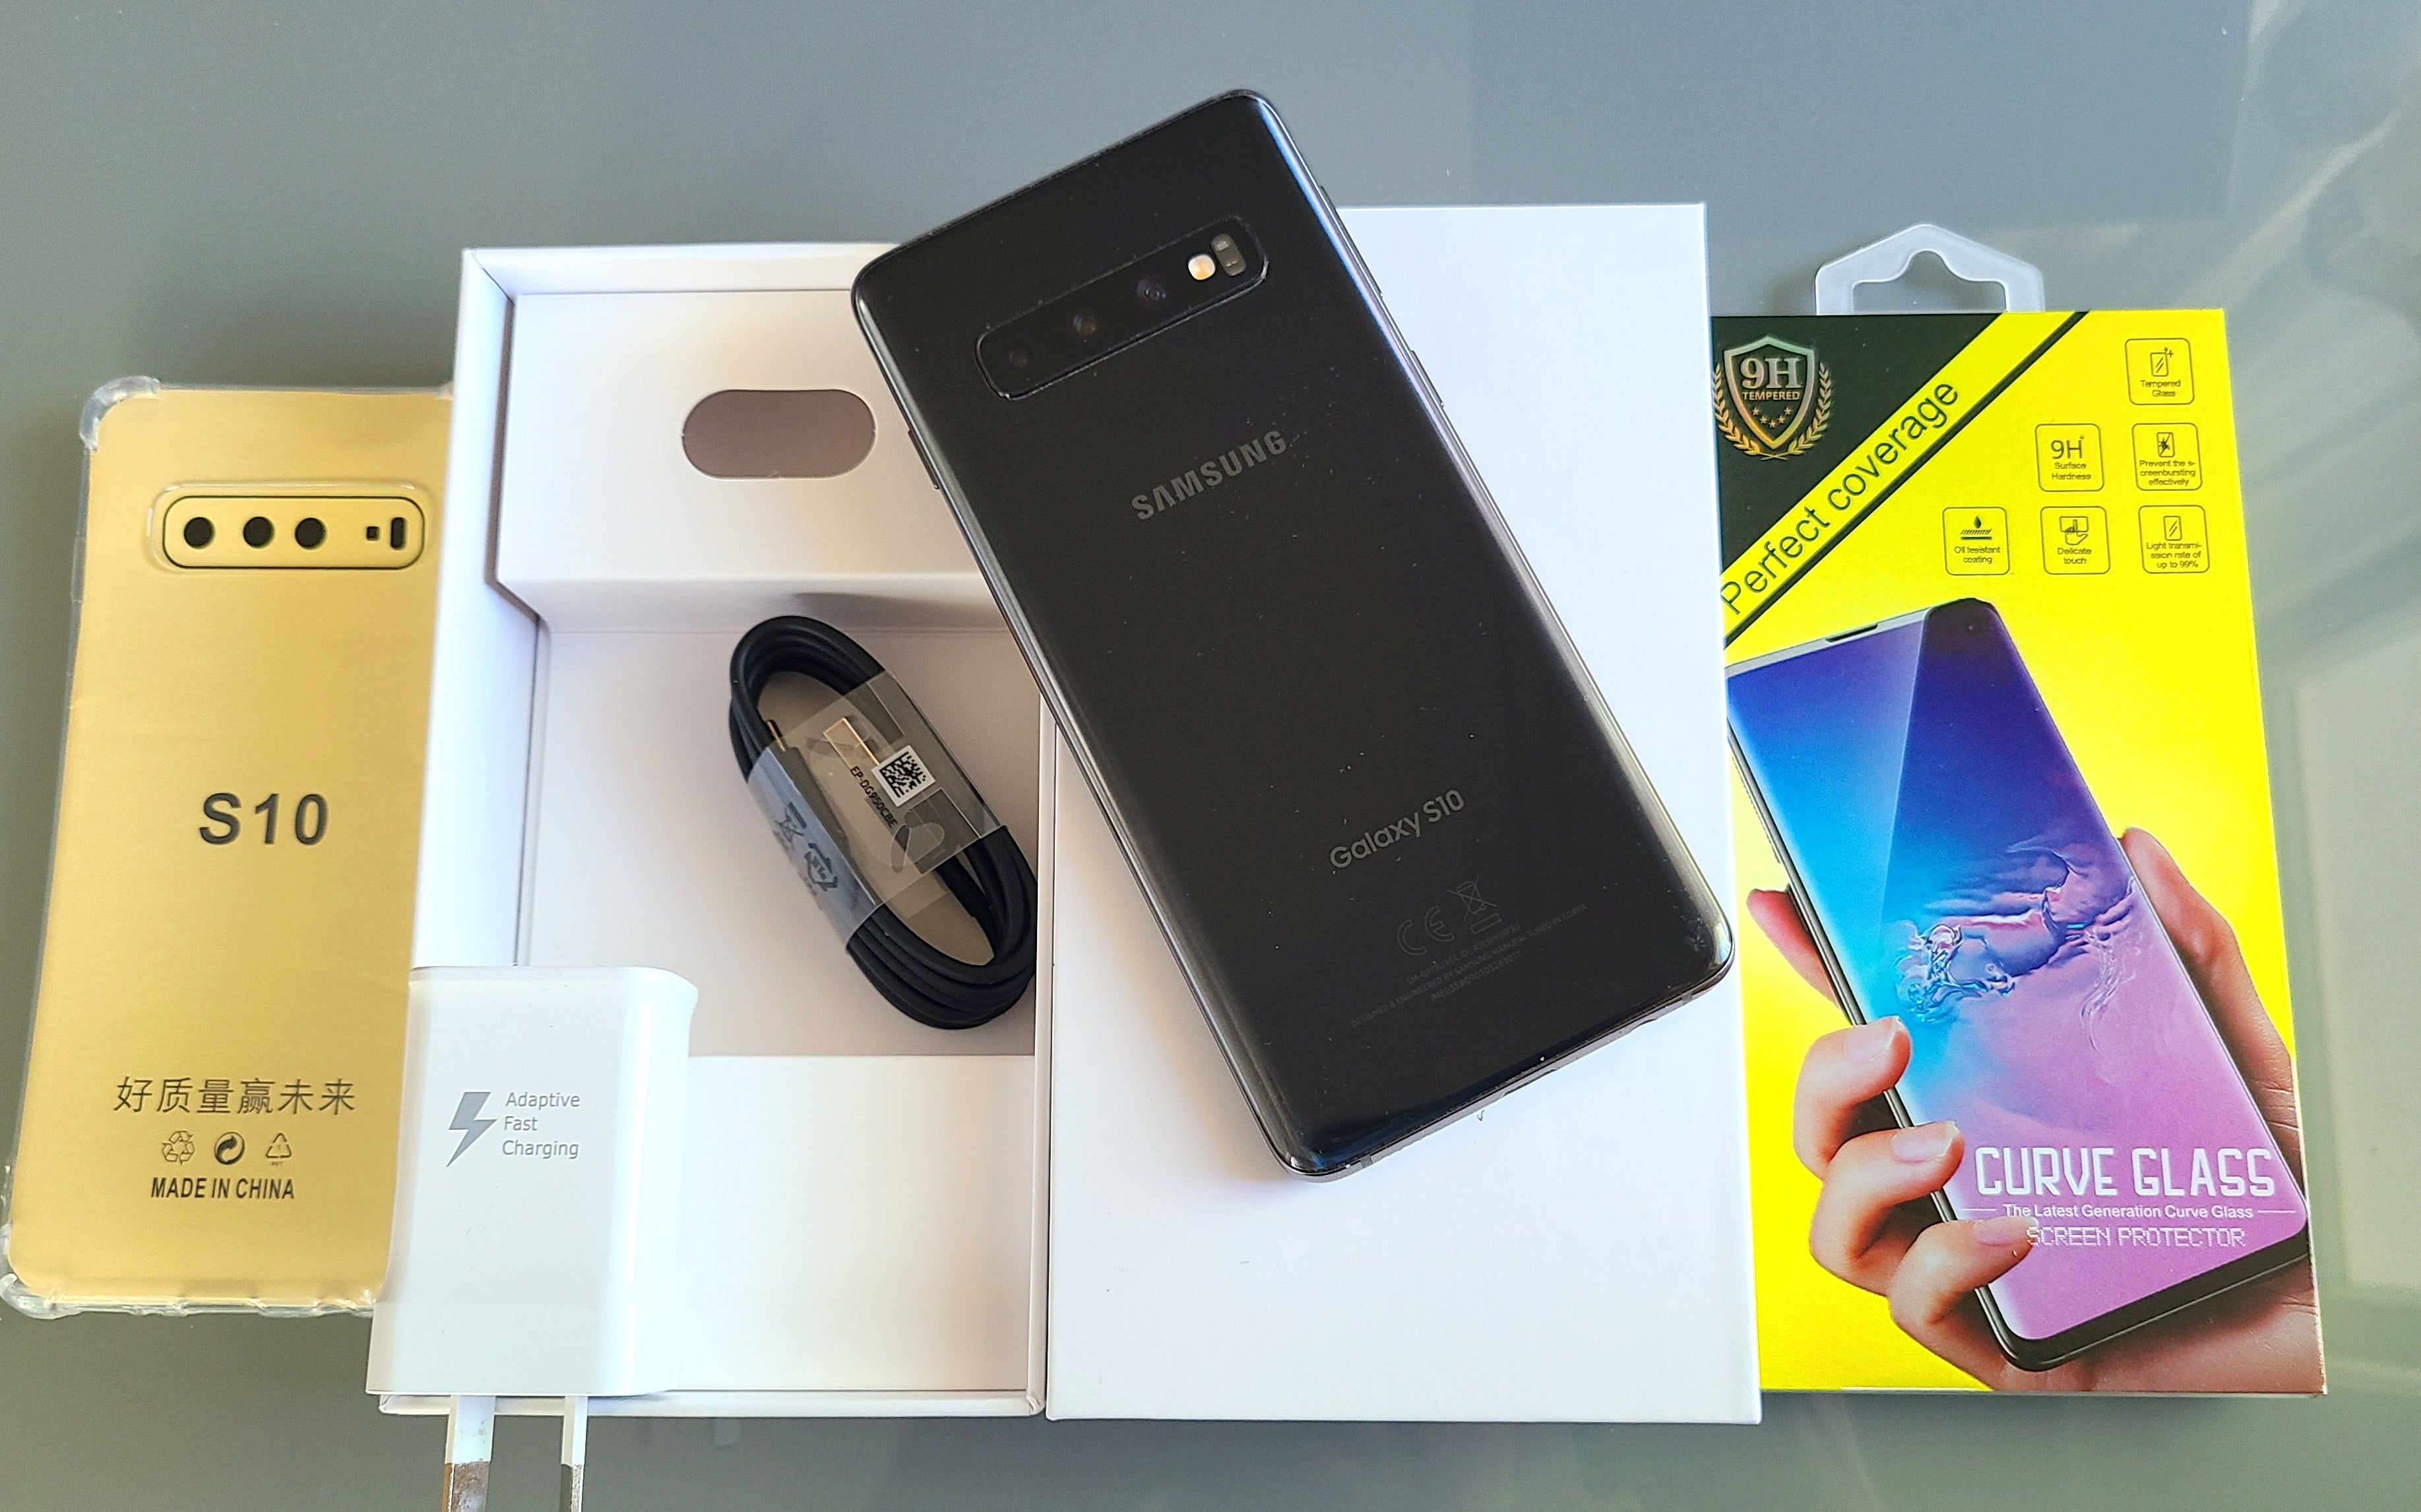 Samsung Galaxy S10 128GB 8GB Prism Black With New Case, Glass Screen Protector & Shipping (Exc)